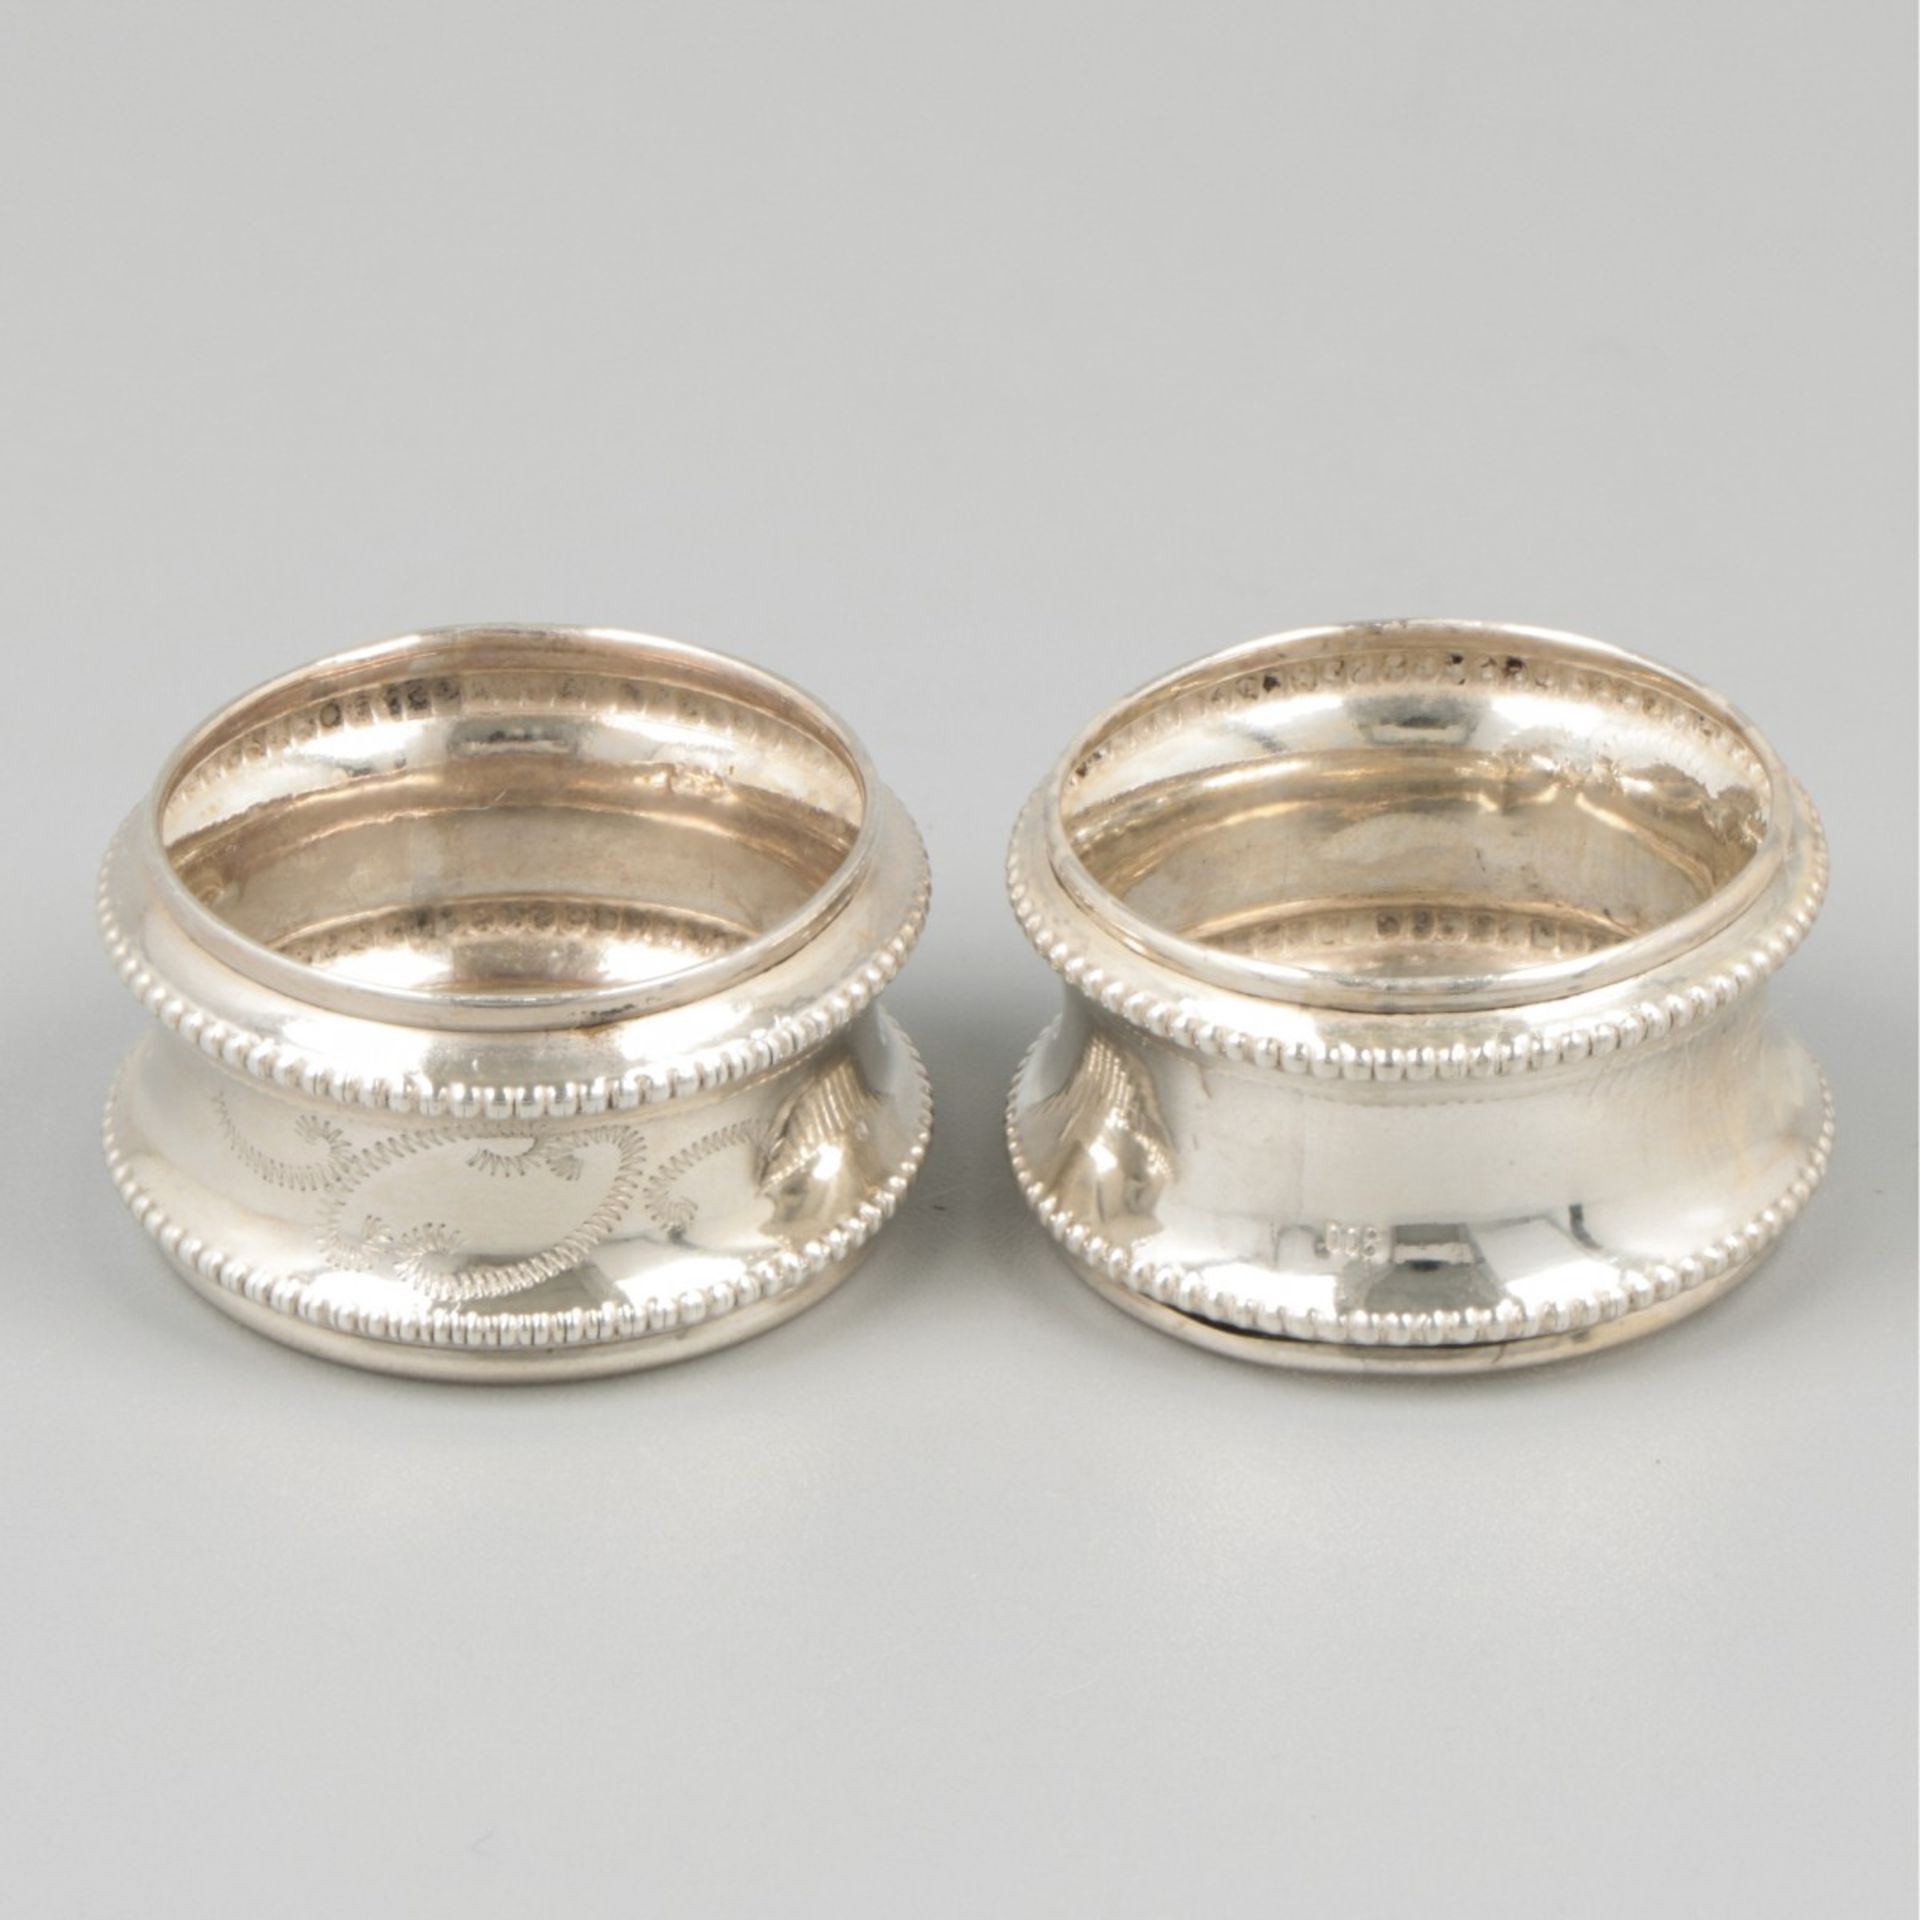 6-piece set of silver finger cloth rings. - Image 2 of 4